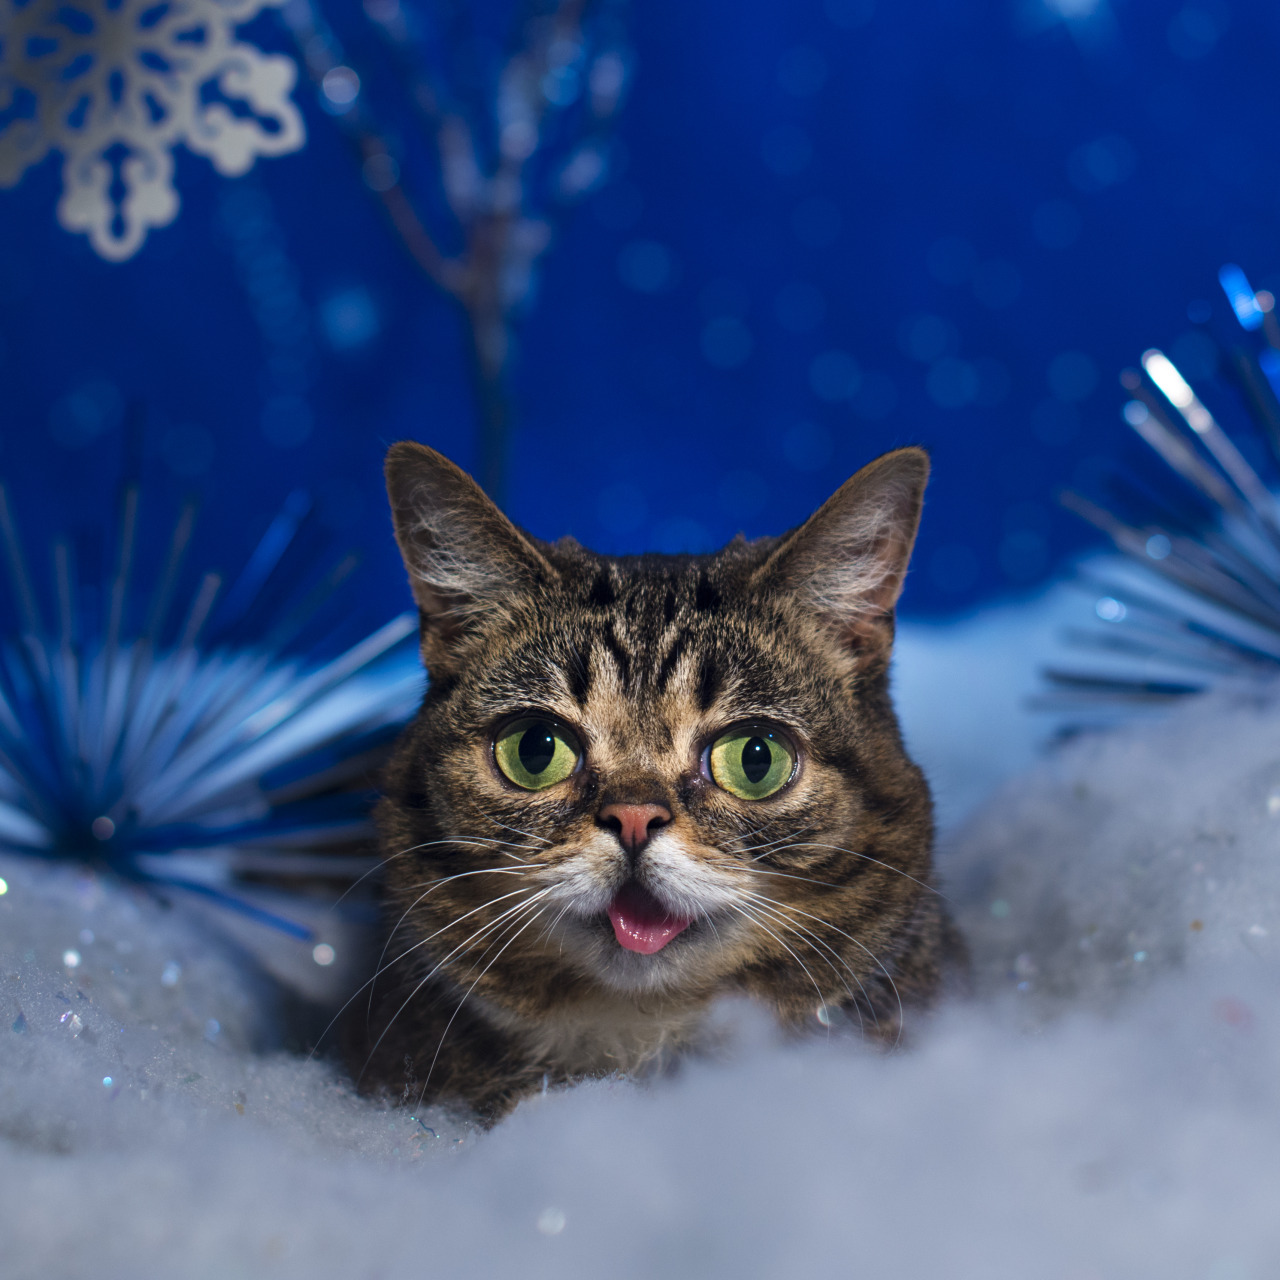 bublog:  BUB doesn’t really celebrate Earth holidays, but appreciates that you